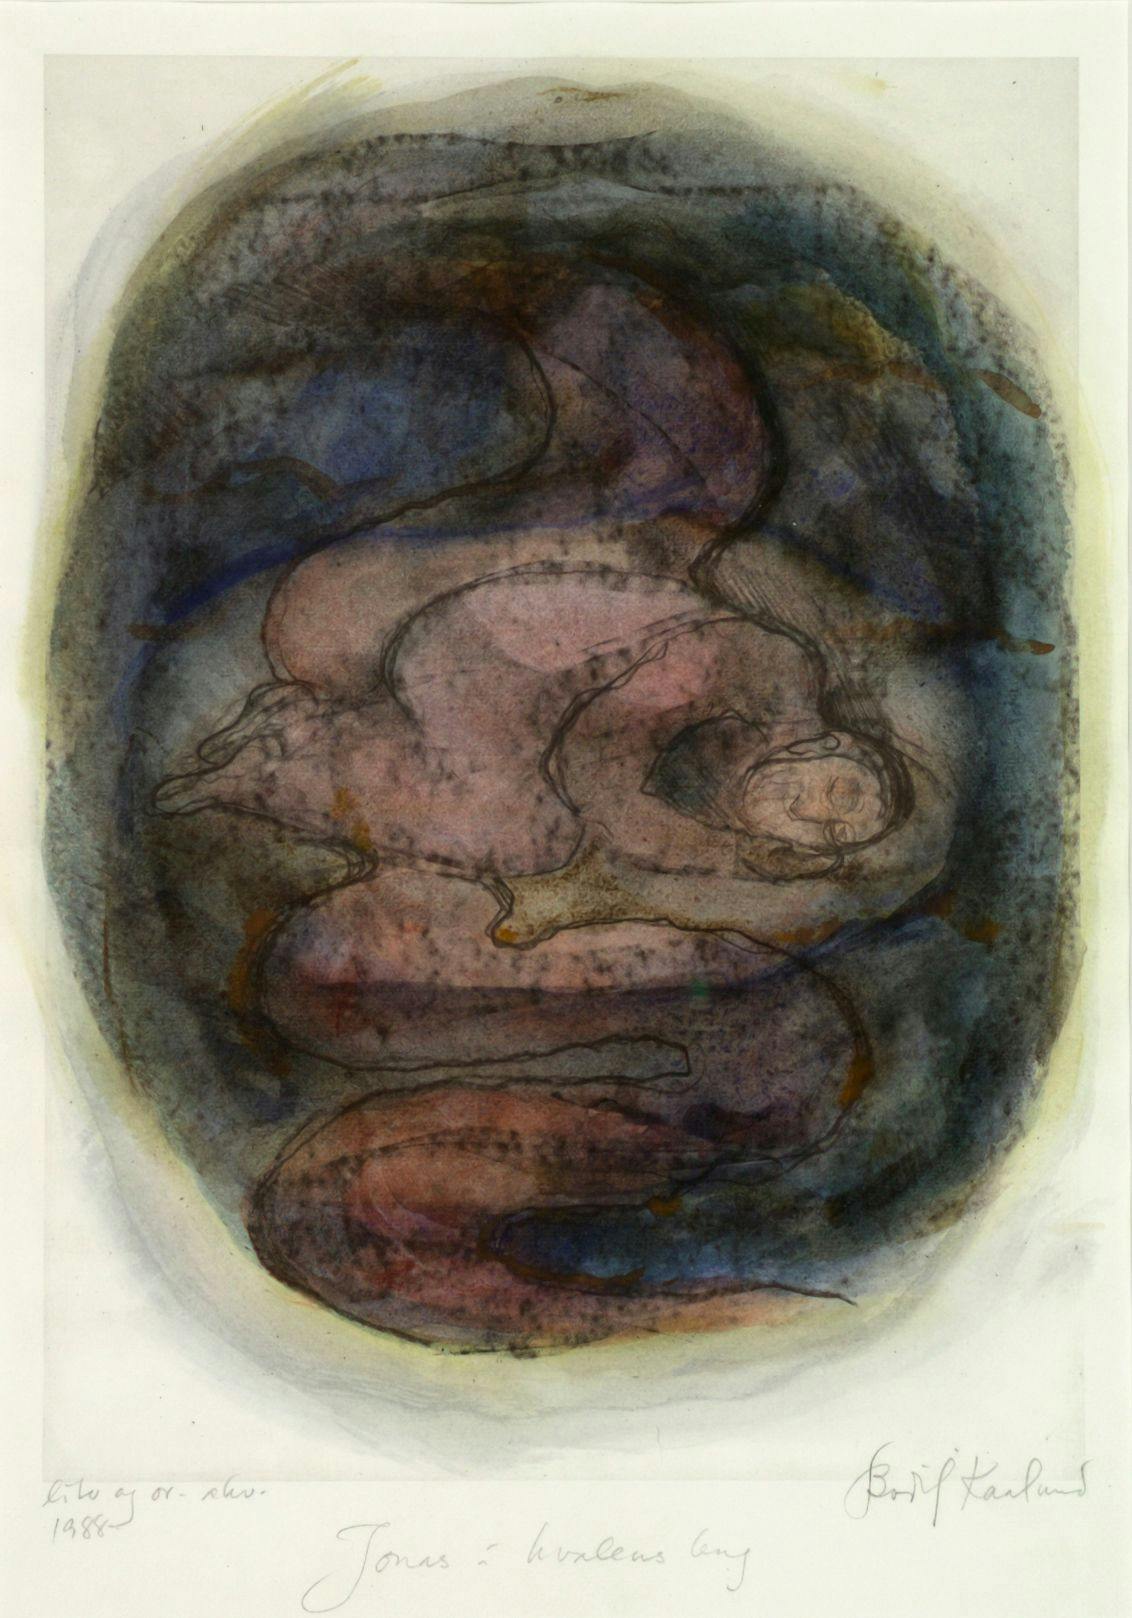 Artwork: Bodil Kaalund, Jonah in the belly of the whale, 1988